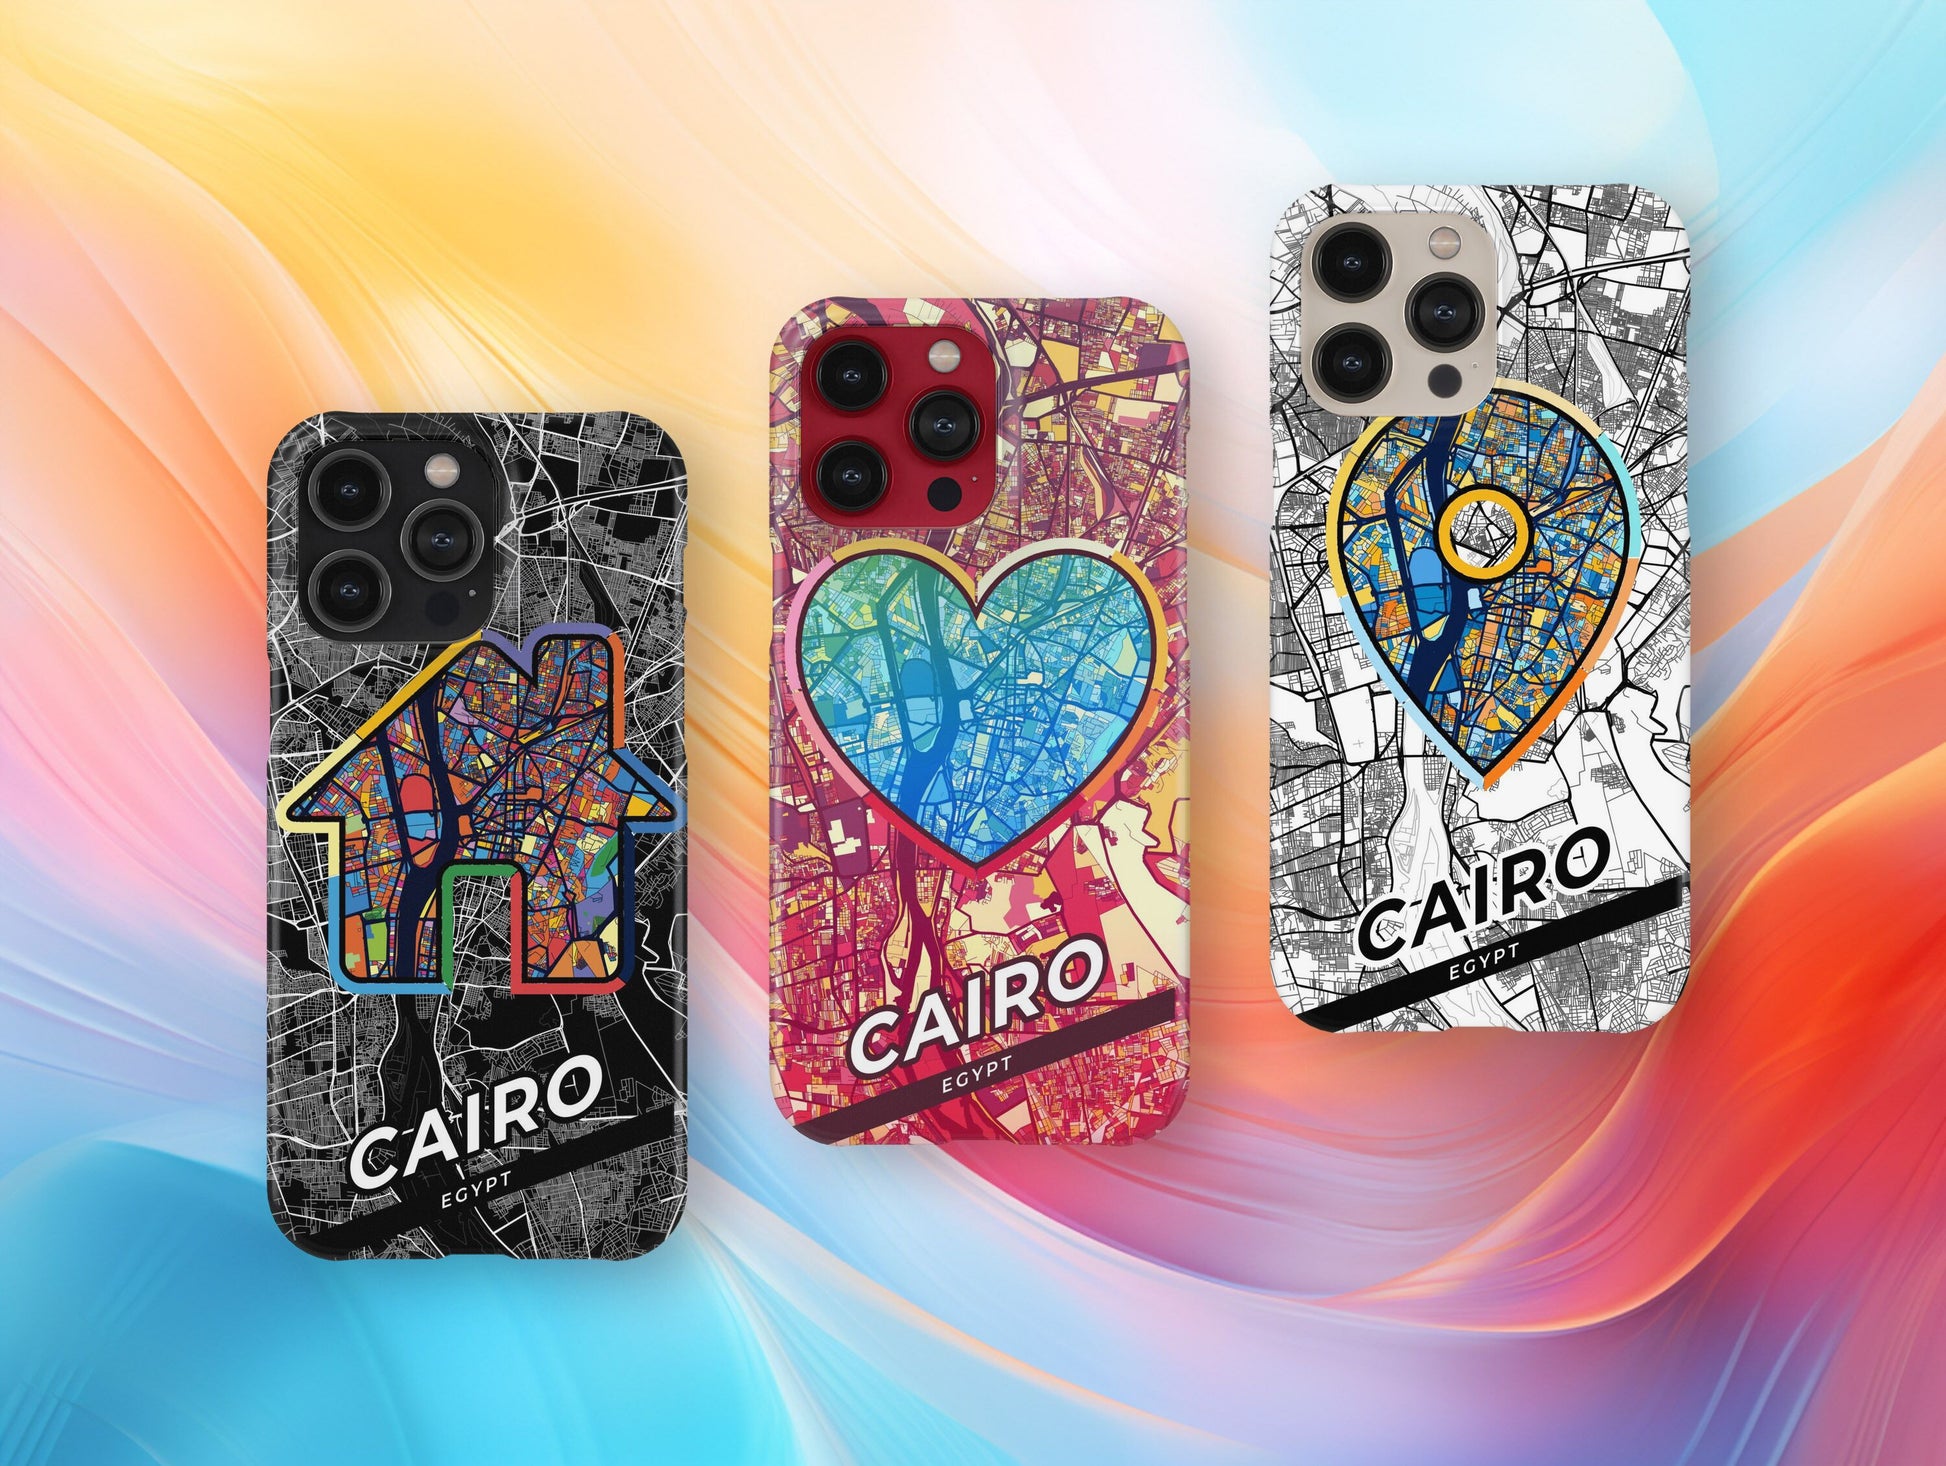 Cairo Egypt slim phone case with colorful icon. Birthday, wedding or housewarming gift. Couple match cases.